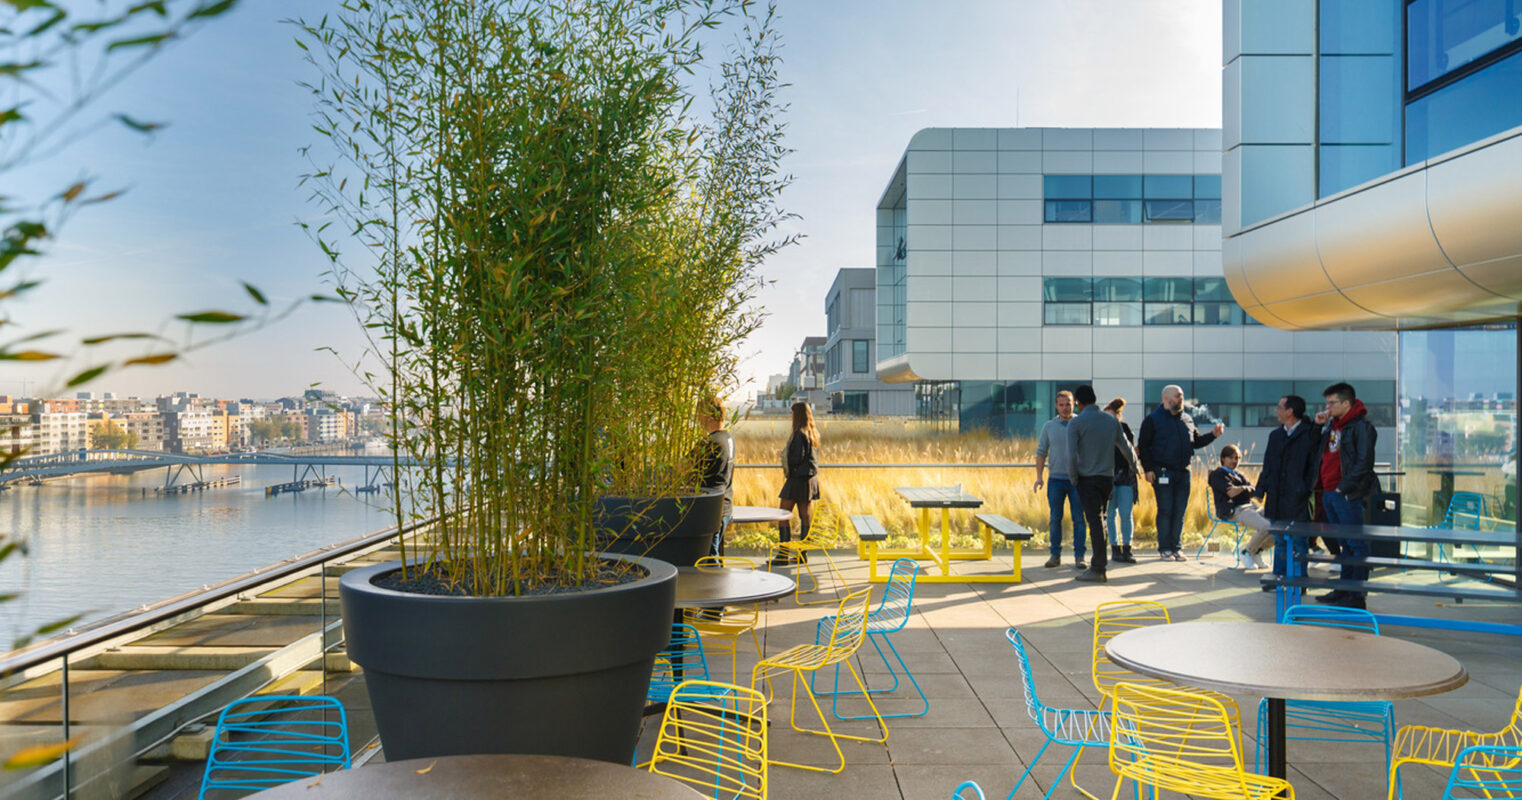 Modern terrace with vibrant yellow and lime green metal chairs, round tables, and large planters. Sleek glass building facade reflects the waterside setting, while visitors engage in conversation amidst the urban landscape.